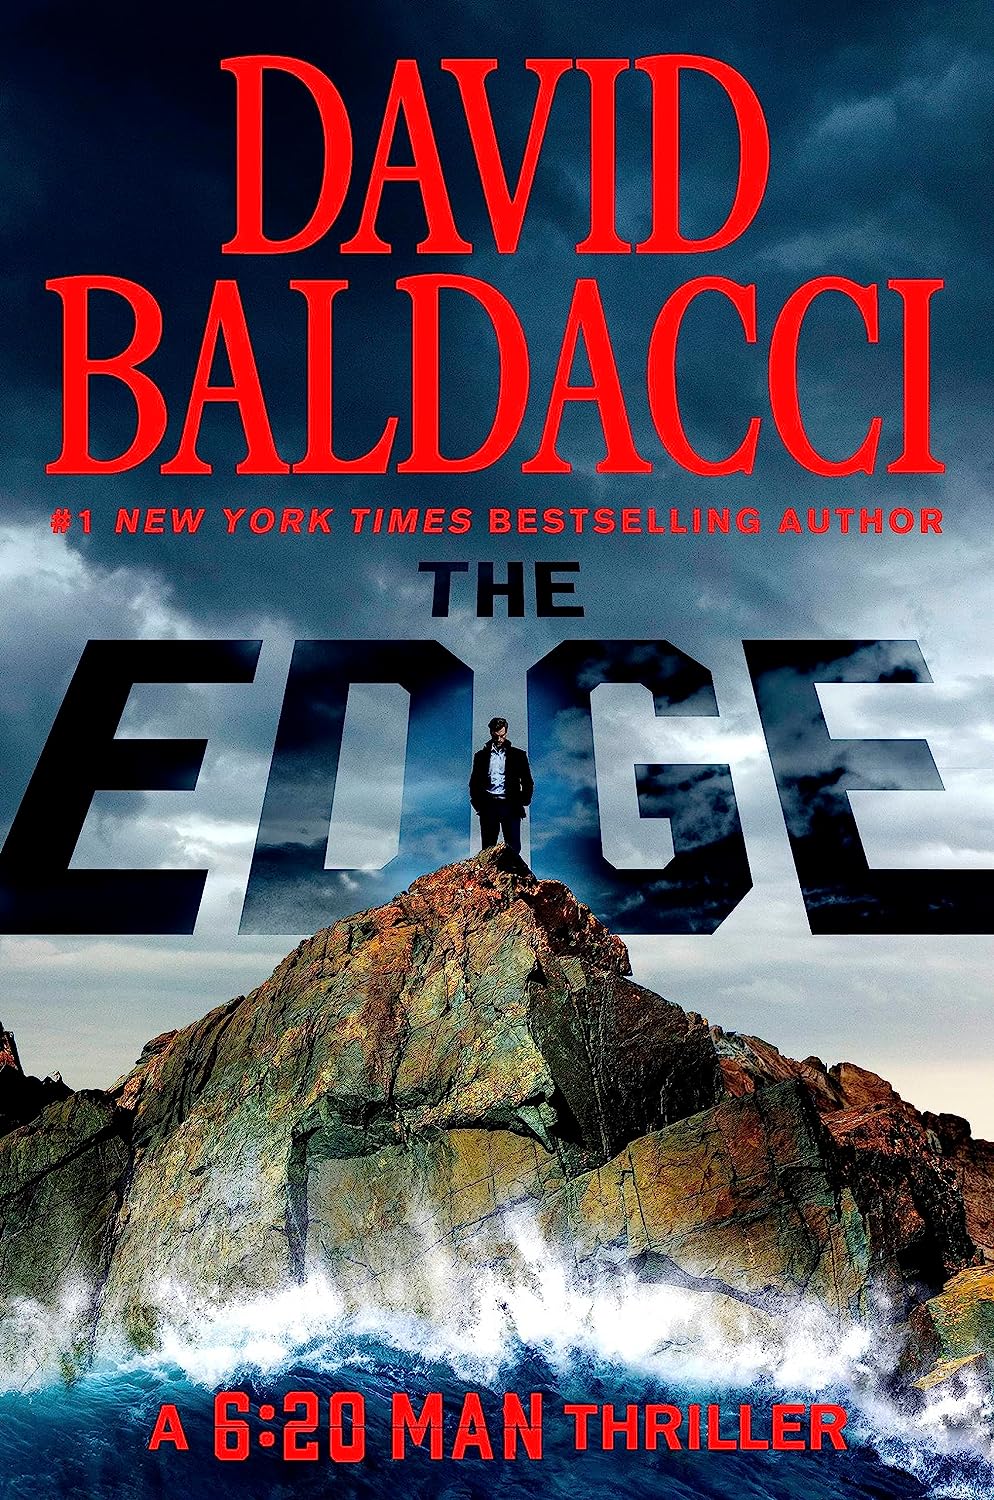 Image for "The Edge"